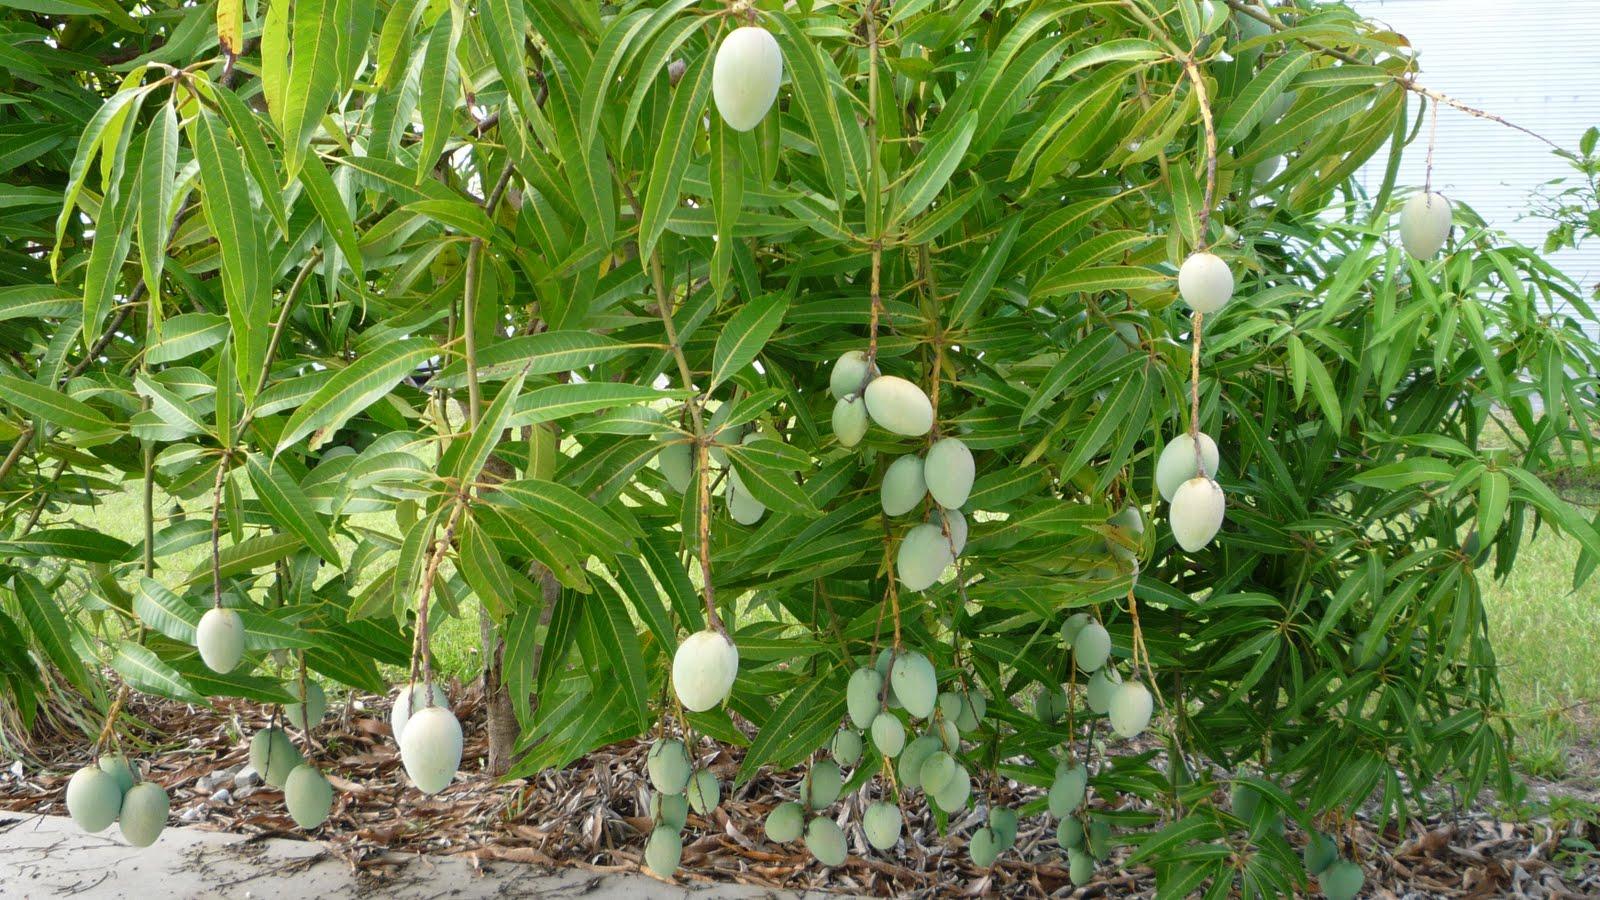 Complete information about Mango tree